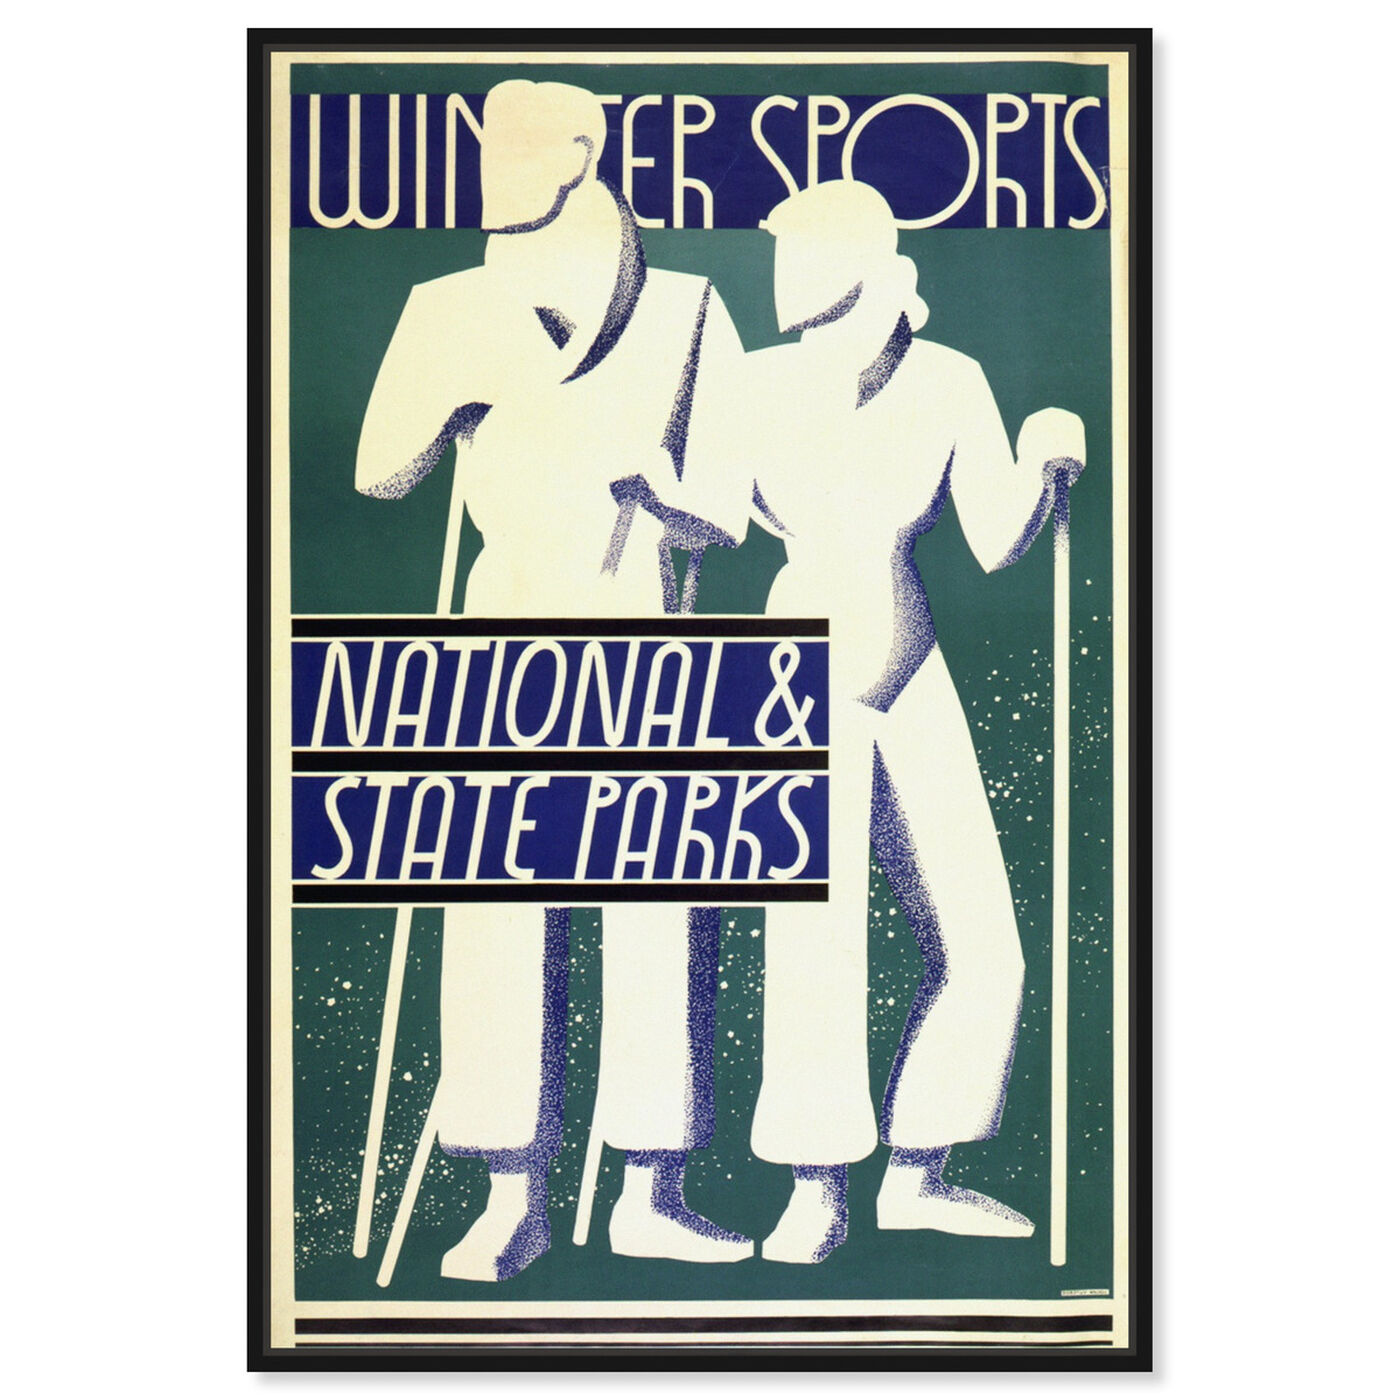 Front view of National and State Parks featuring advertising and posters art.